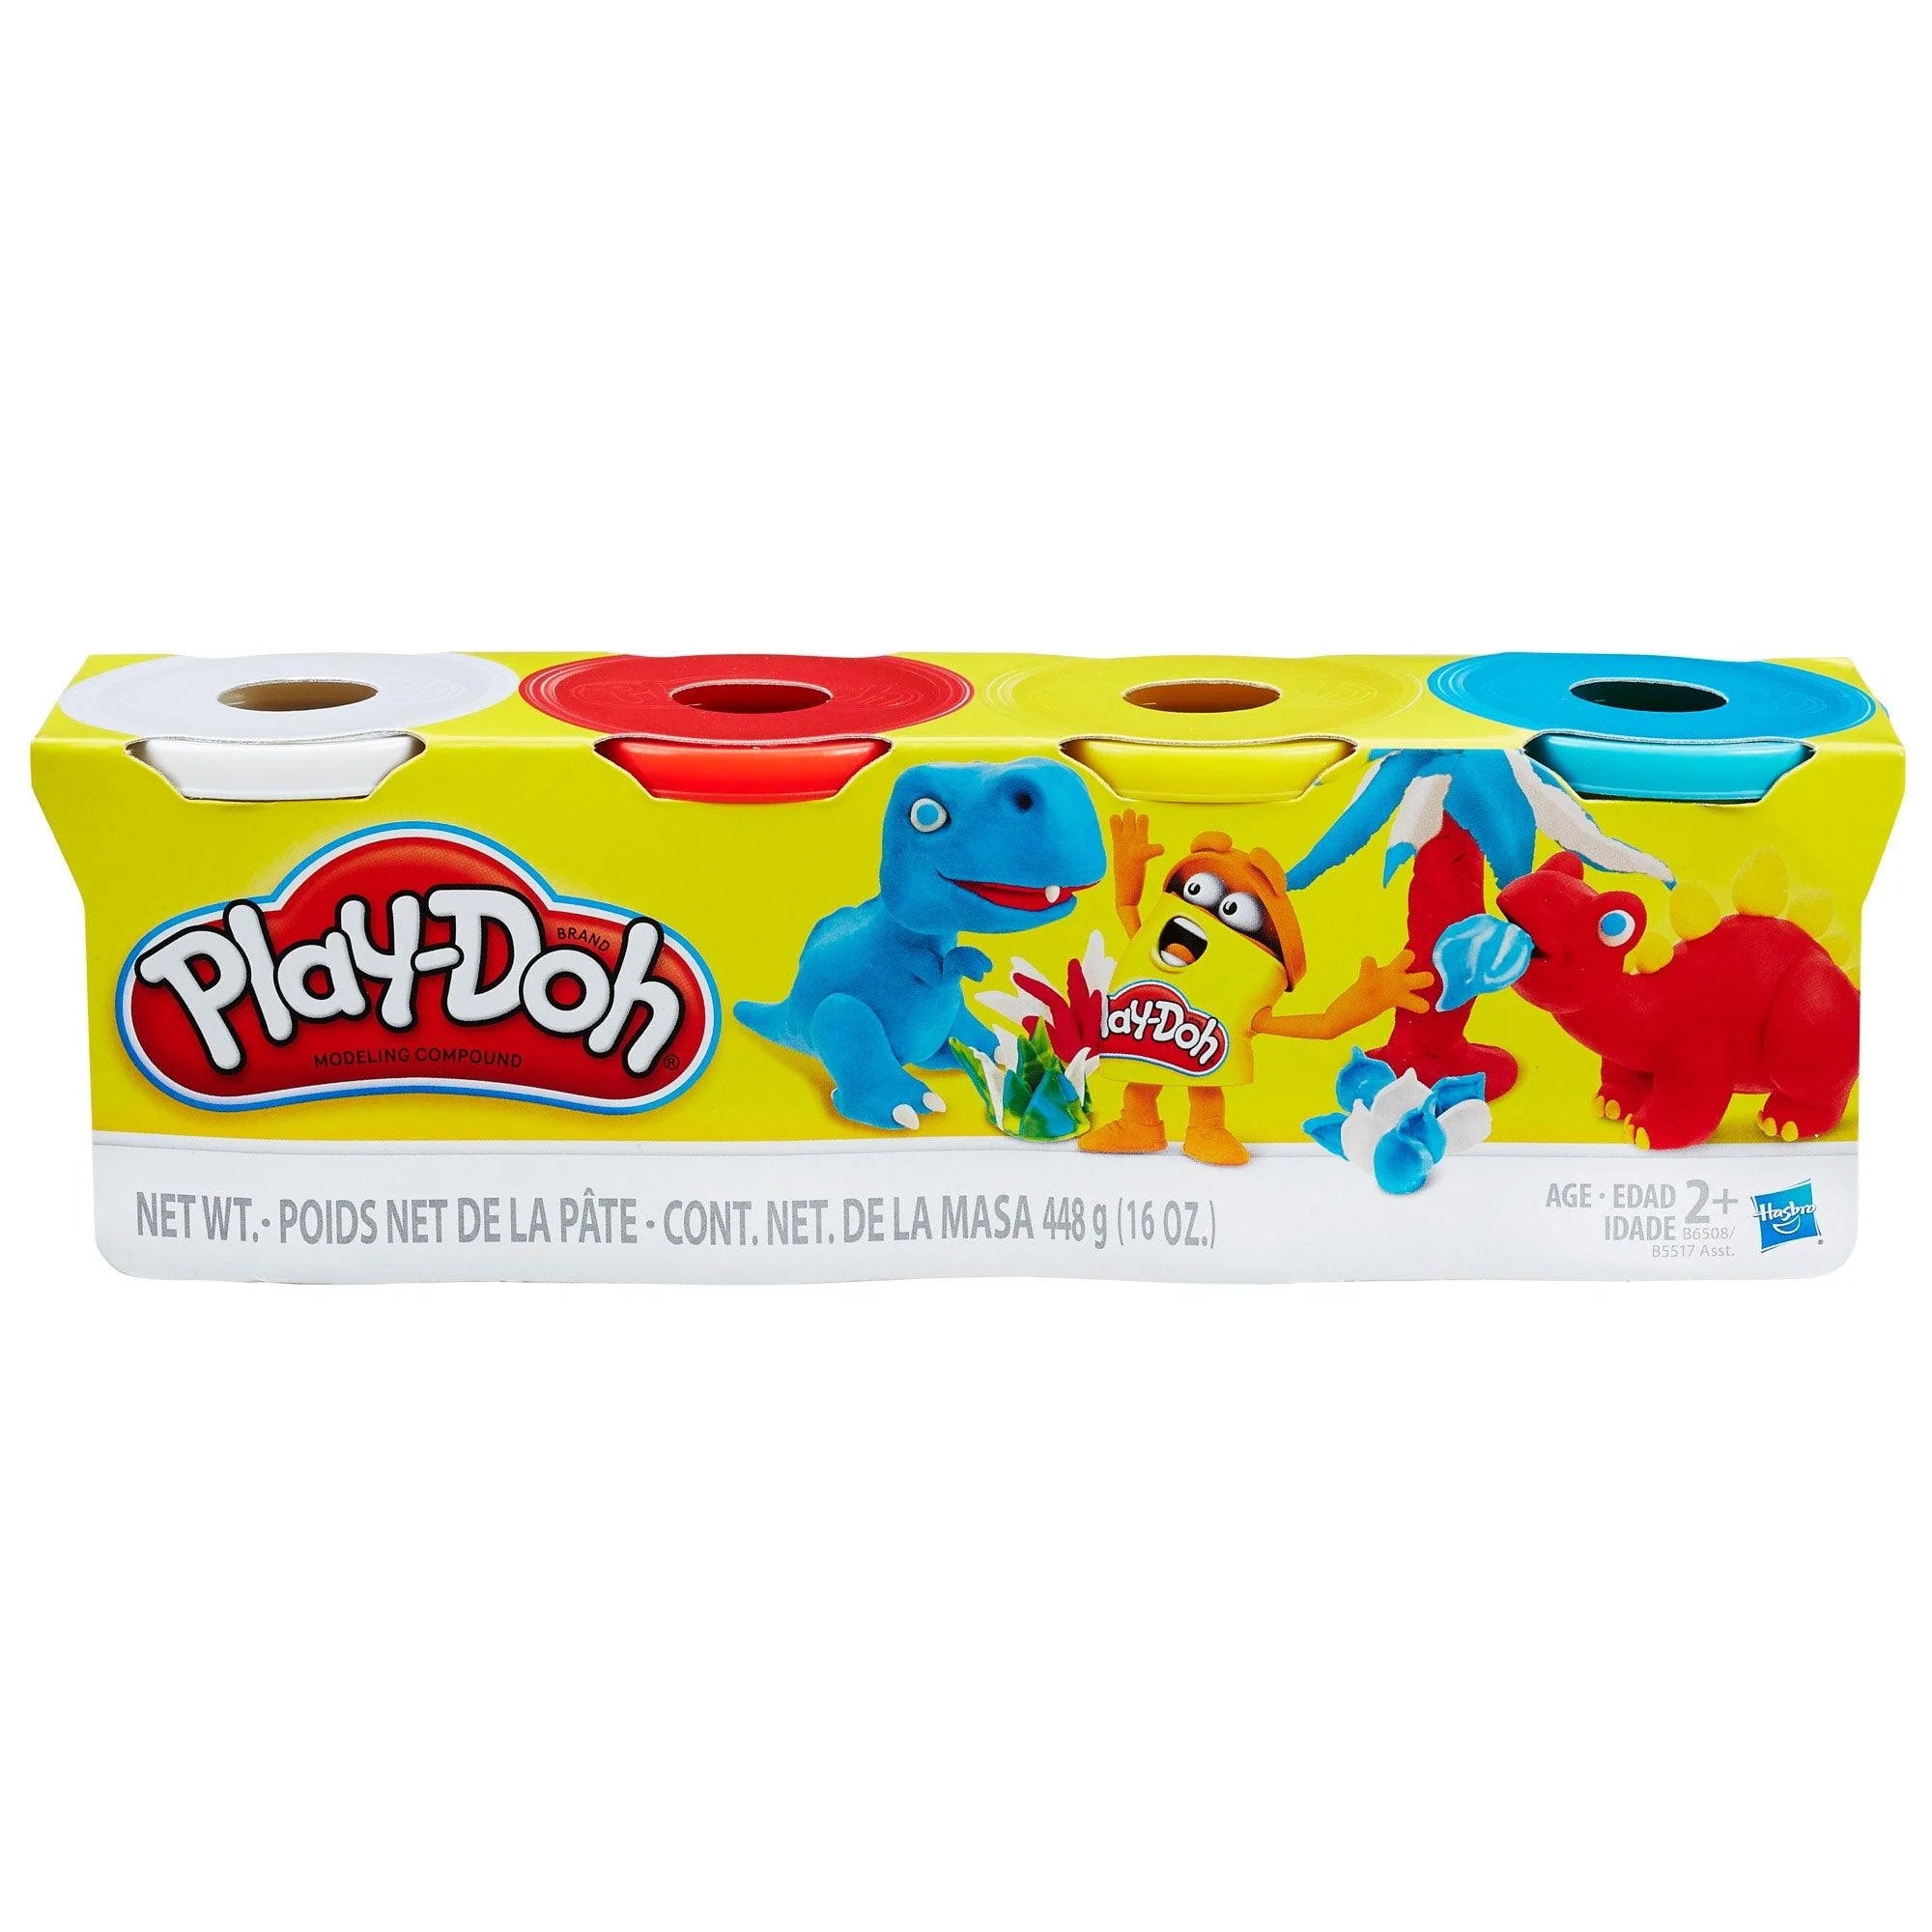 Play-Doh 4-Pack of 4-Ounce Cans (Assorted Colors)